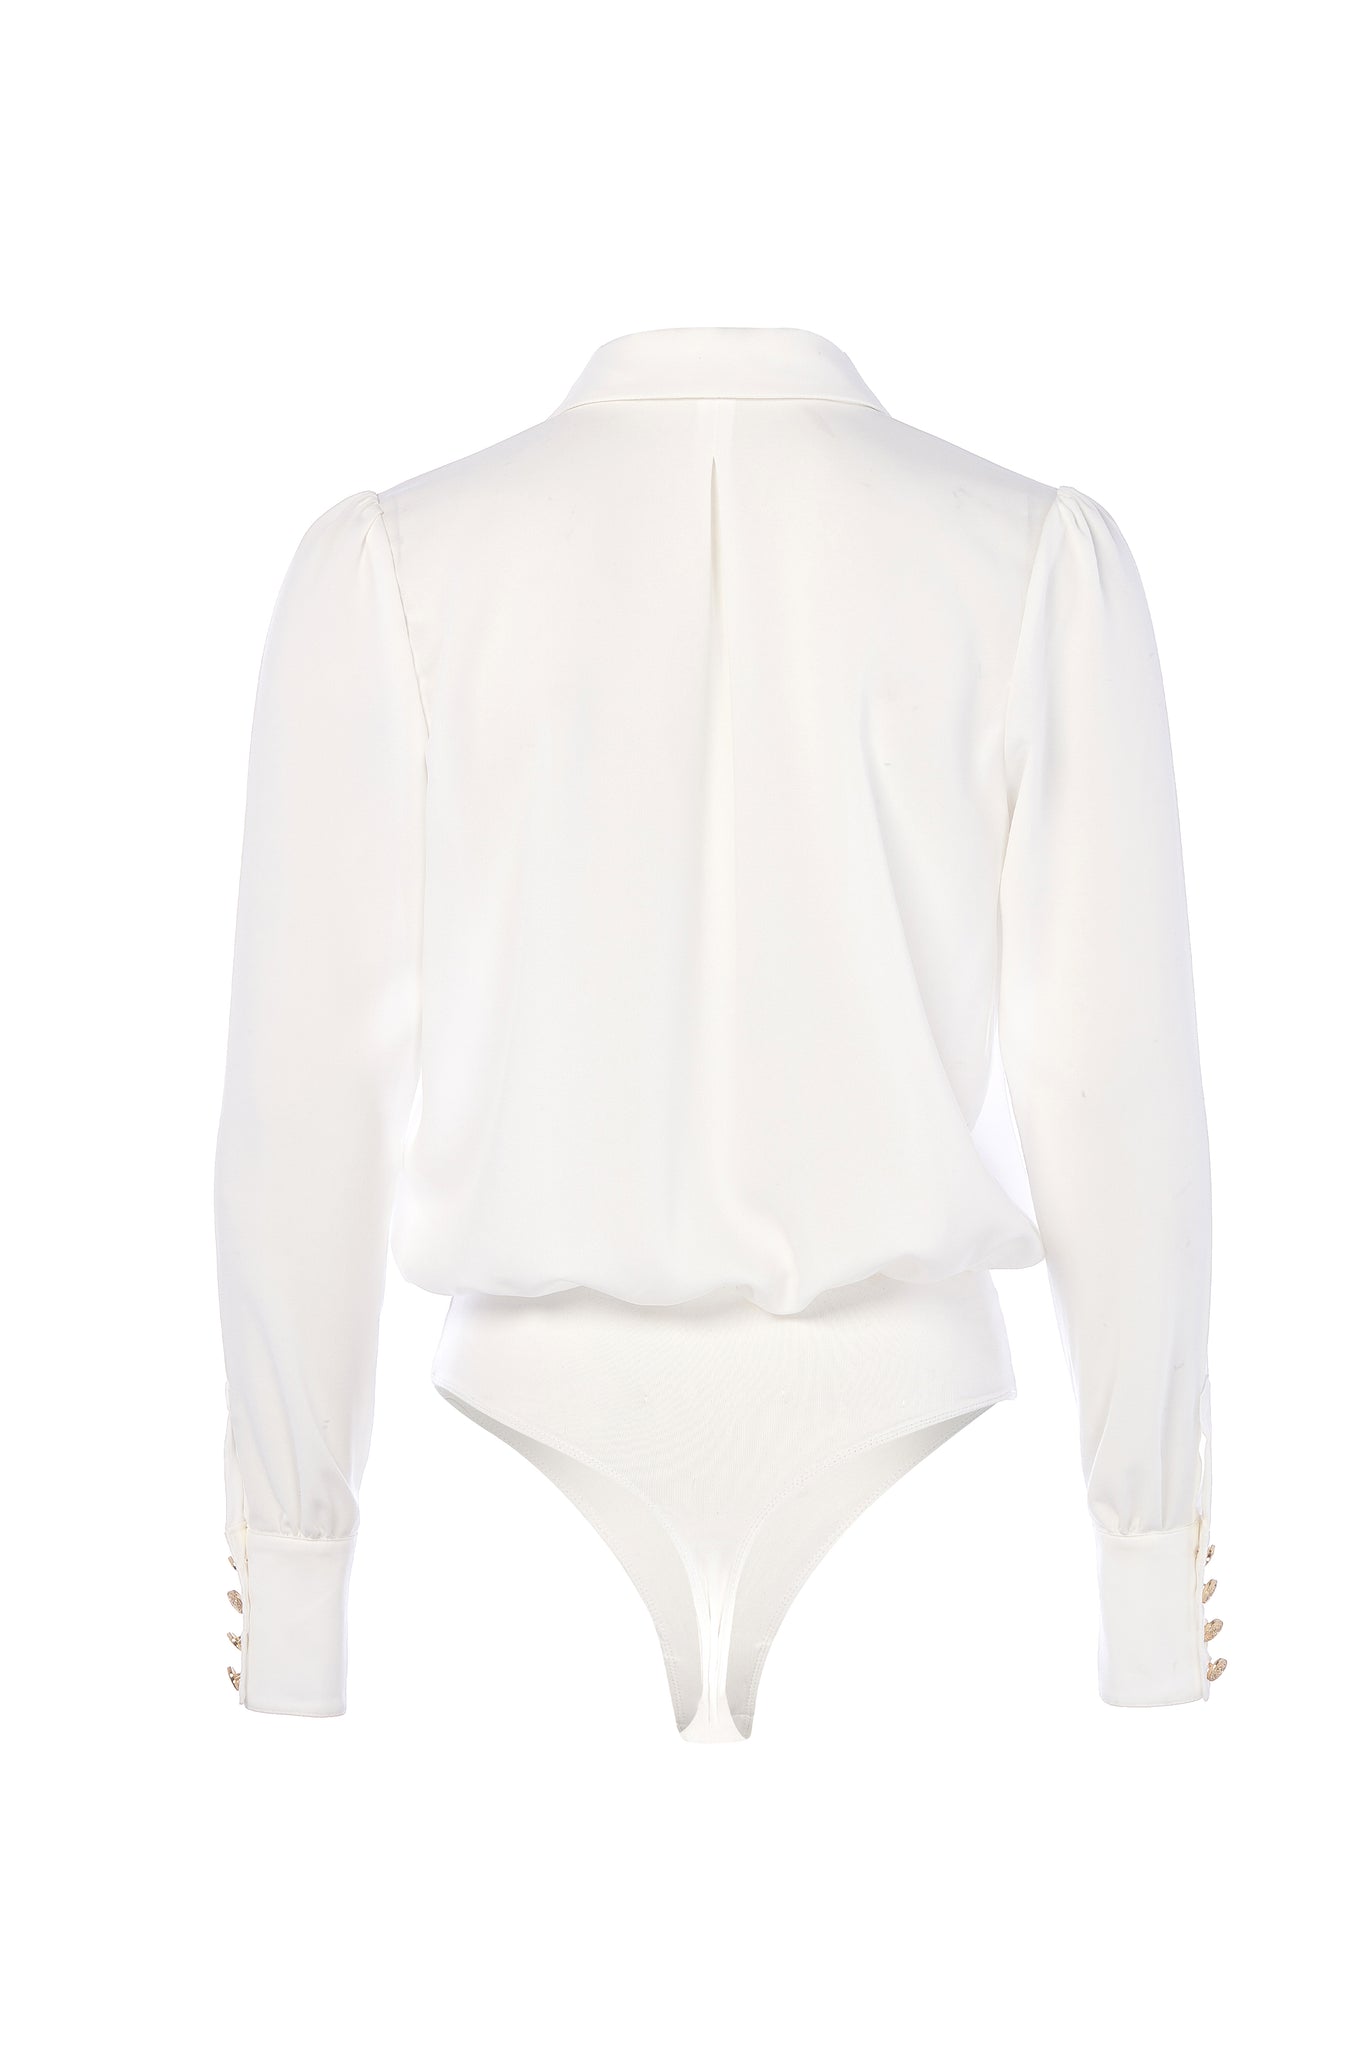 back of womens white cupro cross body style bodysuit with gold hardware shoulders and cuffs with thong back